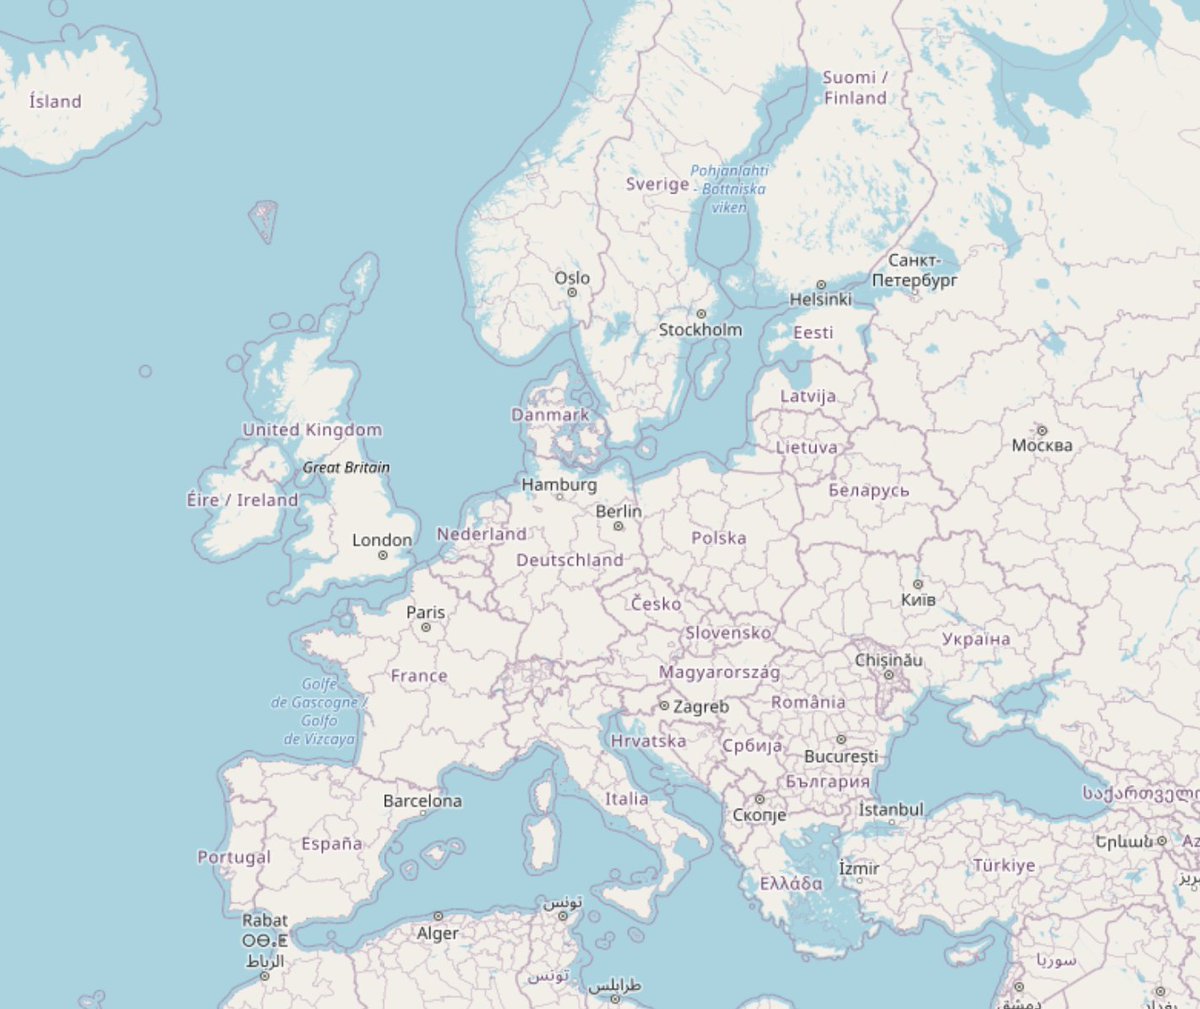 5/ Staying in Europe  we've chatted with  @osm_be   https://blog.opencagedata.com/post/144645475193/country-profile-openstreetmap-in-belgium  @OSMLatvija   https://blog.opencagedata.com/post/108909920038/country-profile-openstreetmap-in-latvia but also regional groups like South Tyrol  https://blog.opencagedata.com/post/155402204823/openstreetmap-in-south-tyrol-martin-raifer and  @osmcatala  https://blog.opencagedata.com/post/118777421933/country-profile-openstreetmap-in-catalonia (and many others)